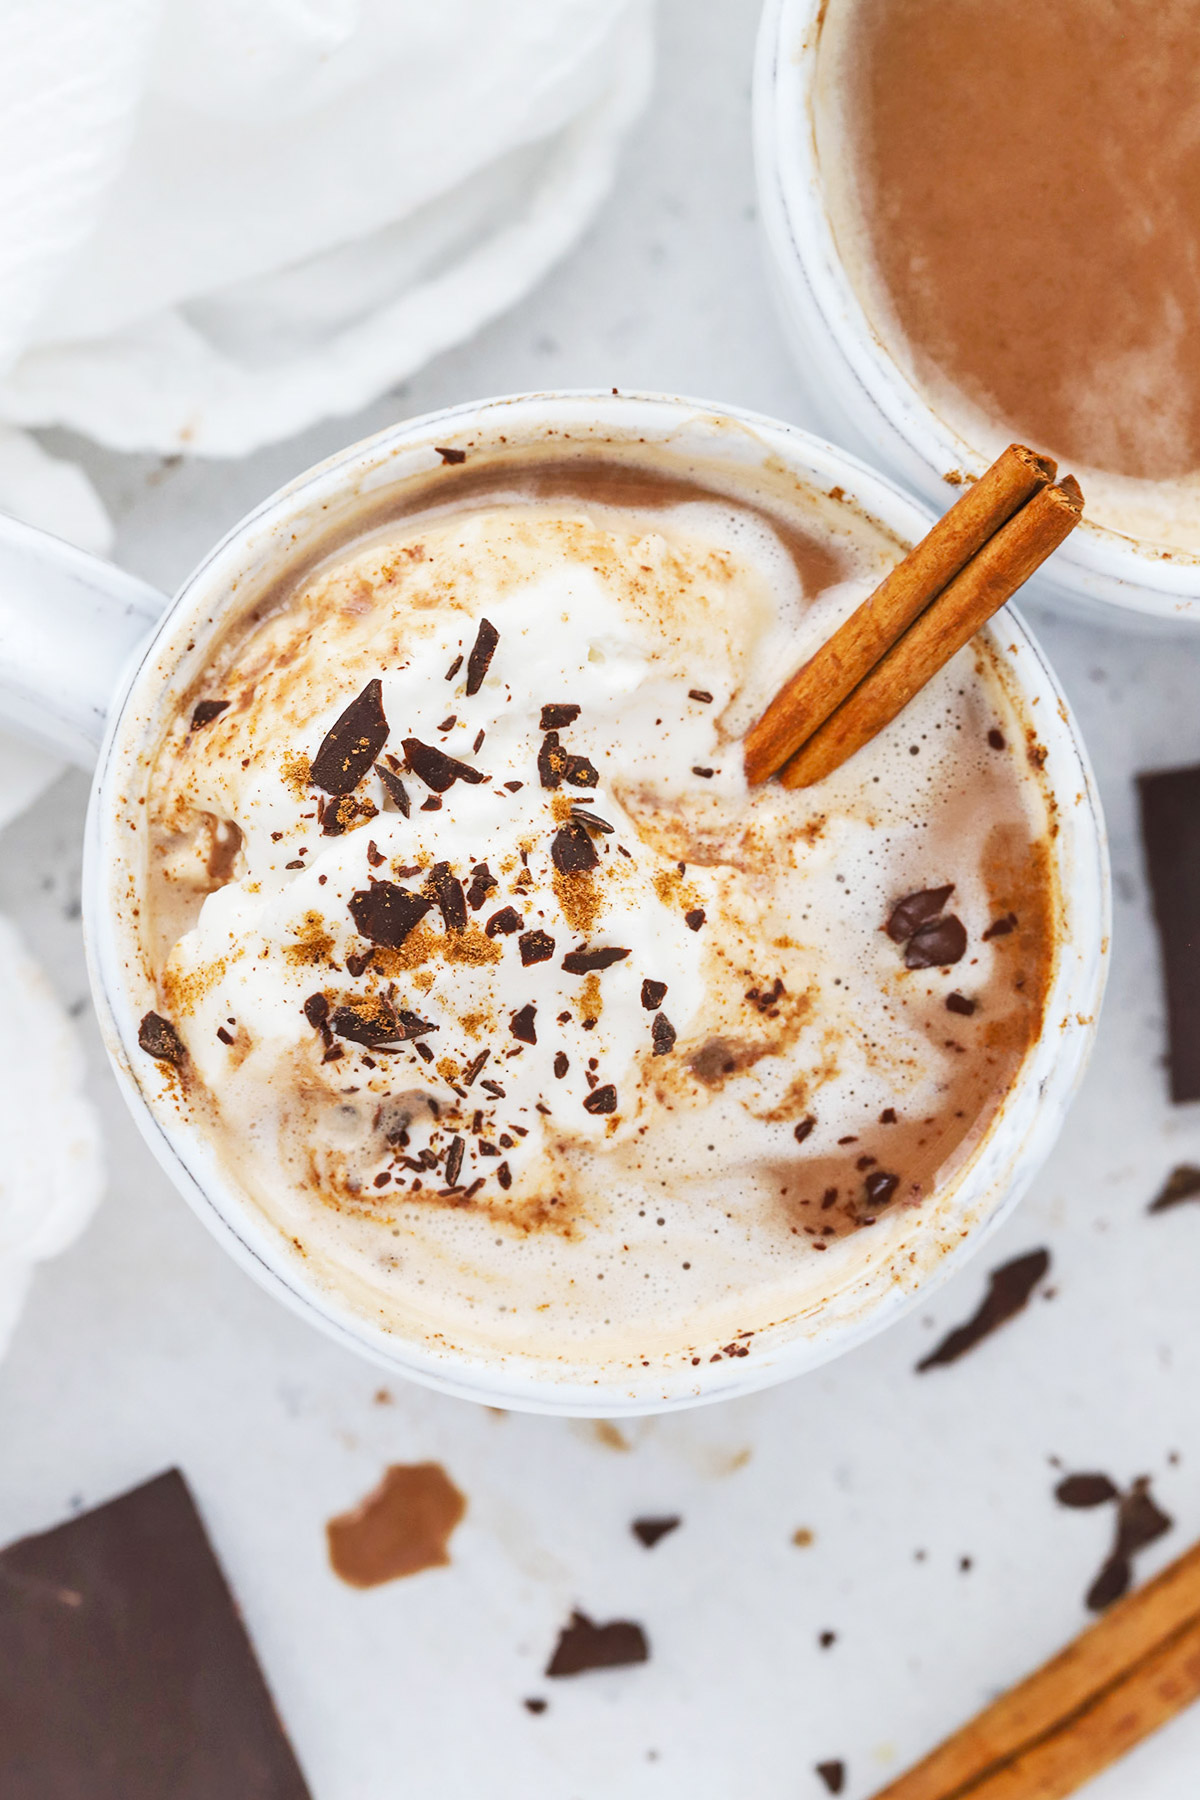 Overhead view of a steaming mug of dairy-free pumpkin spice hot chocolate topped with coconut whipped cream, shaved chocolate, and pumpkin spice